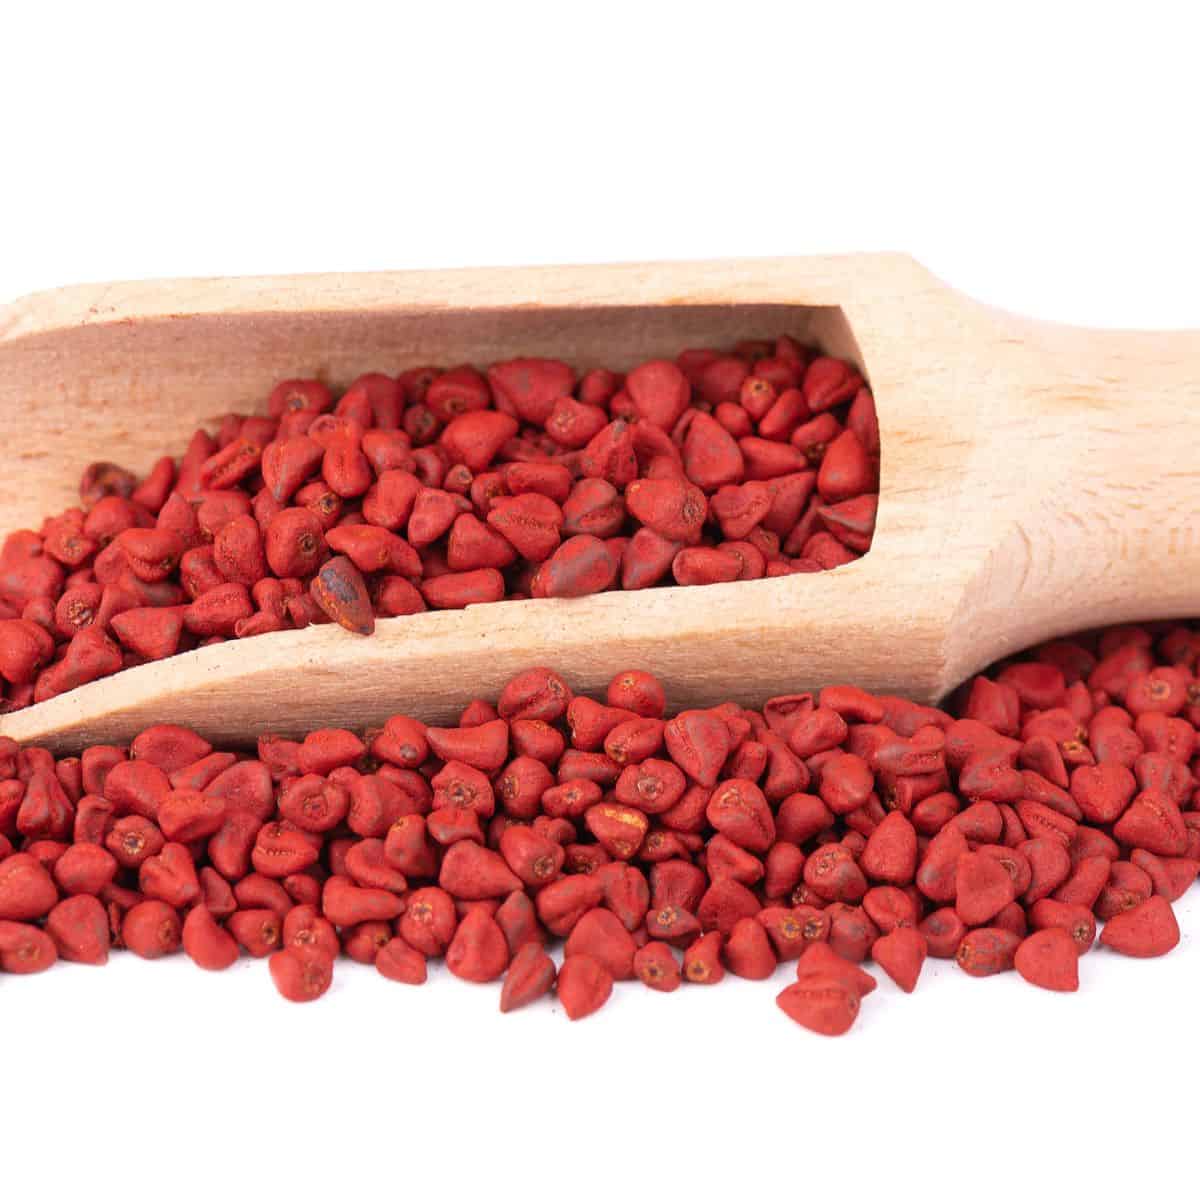 Annatto seeds in a wooden measuring spoon